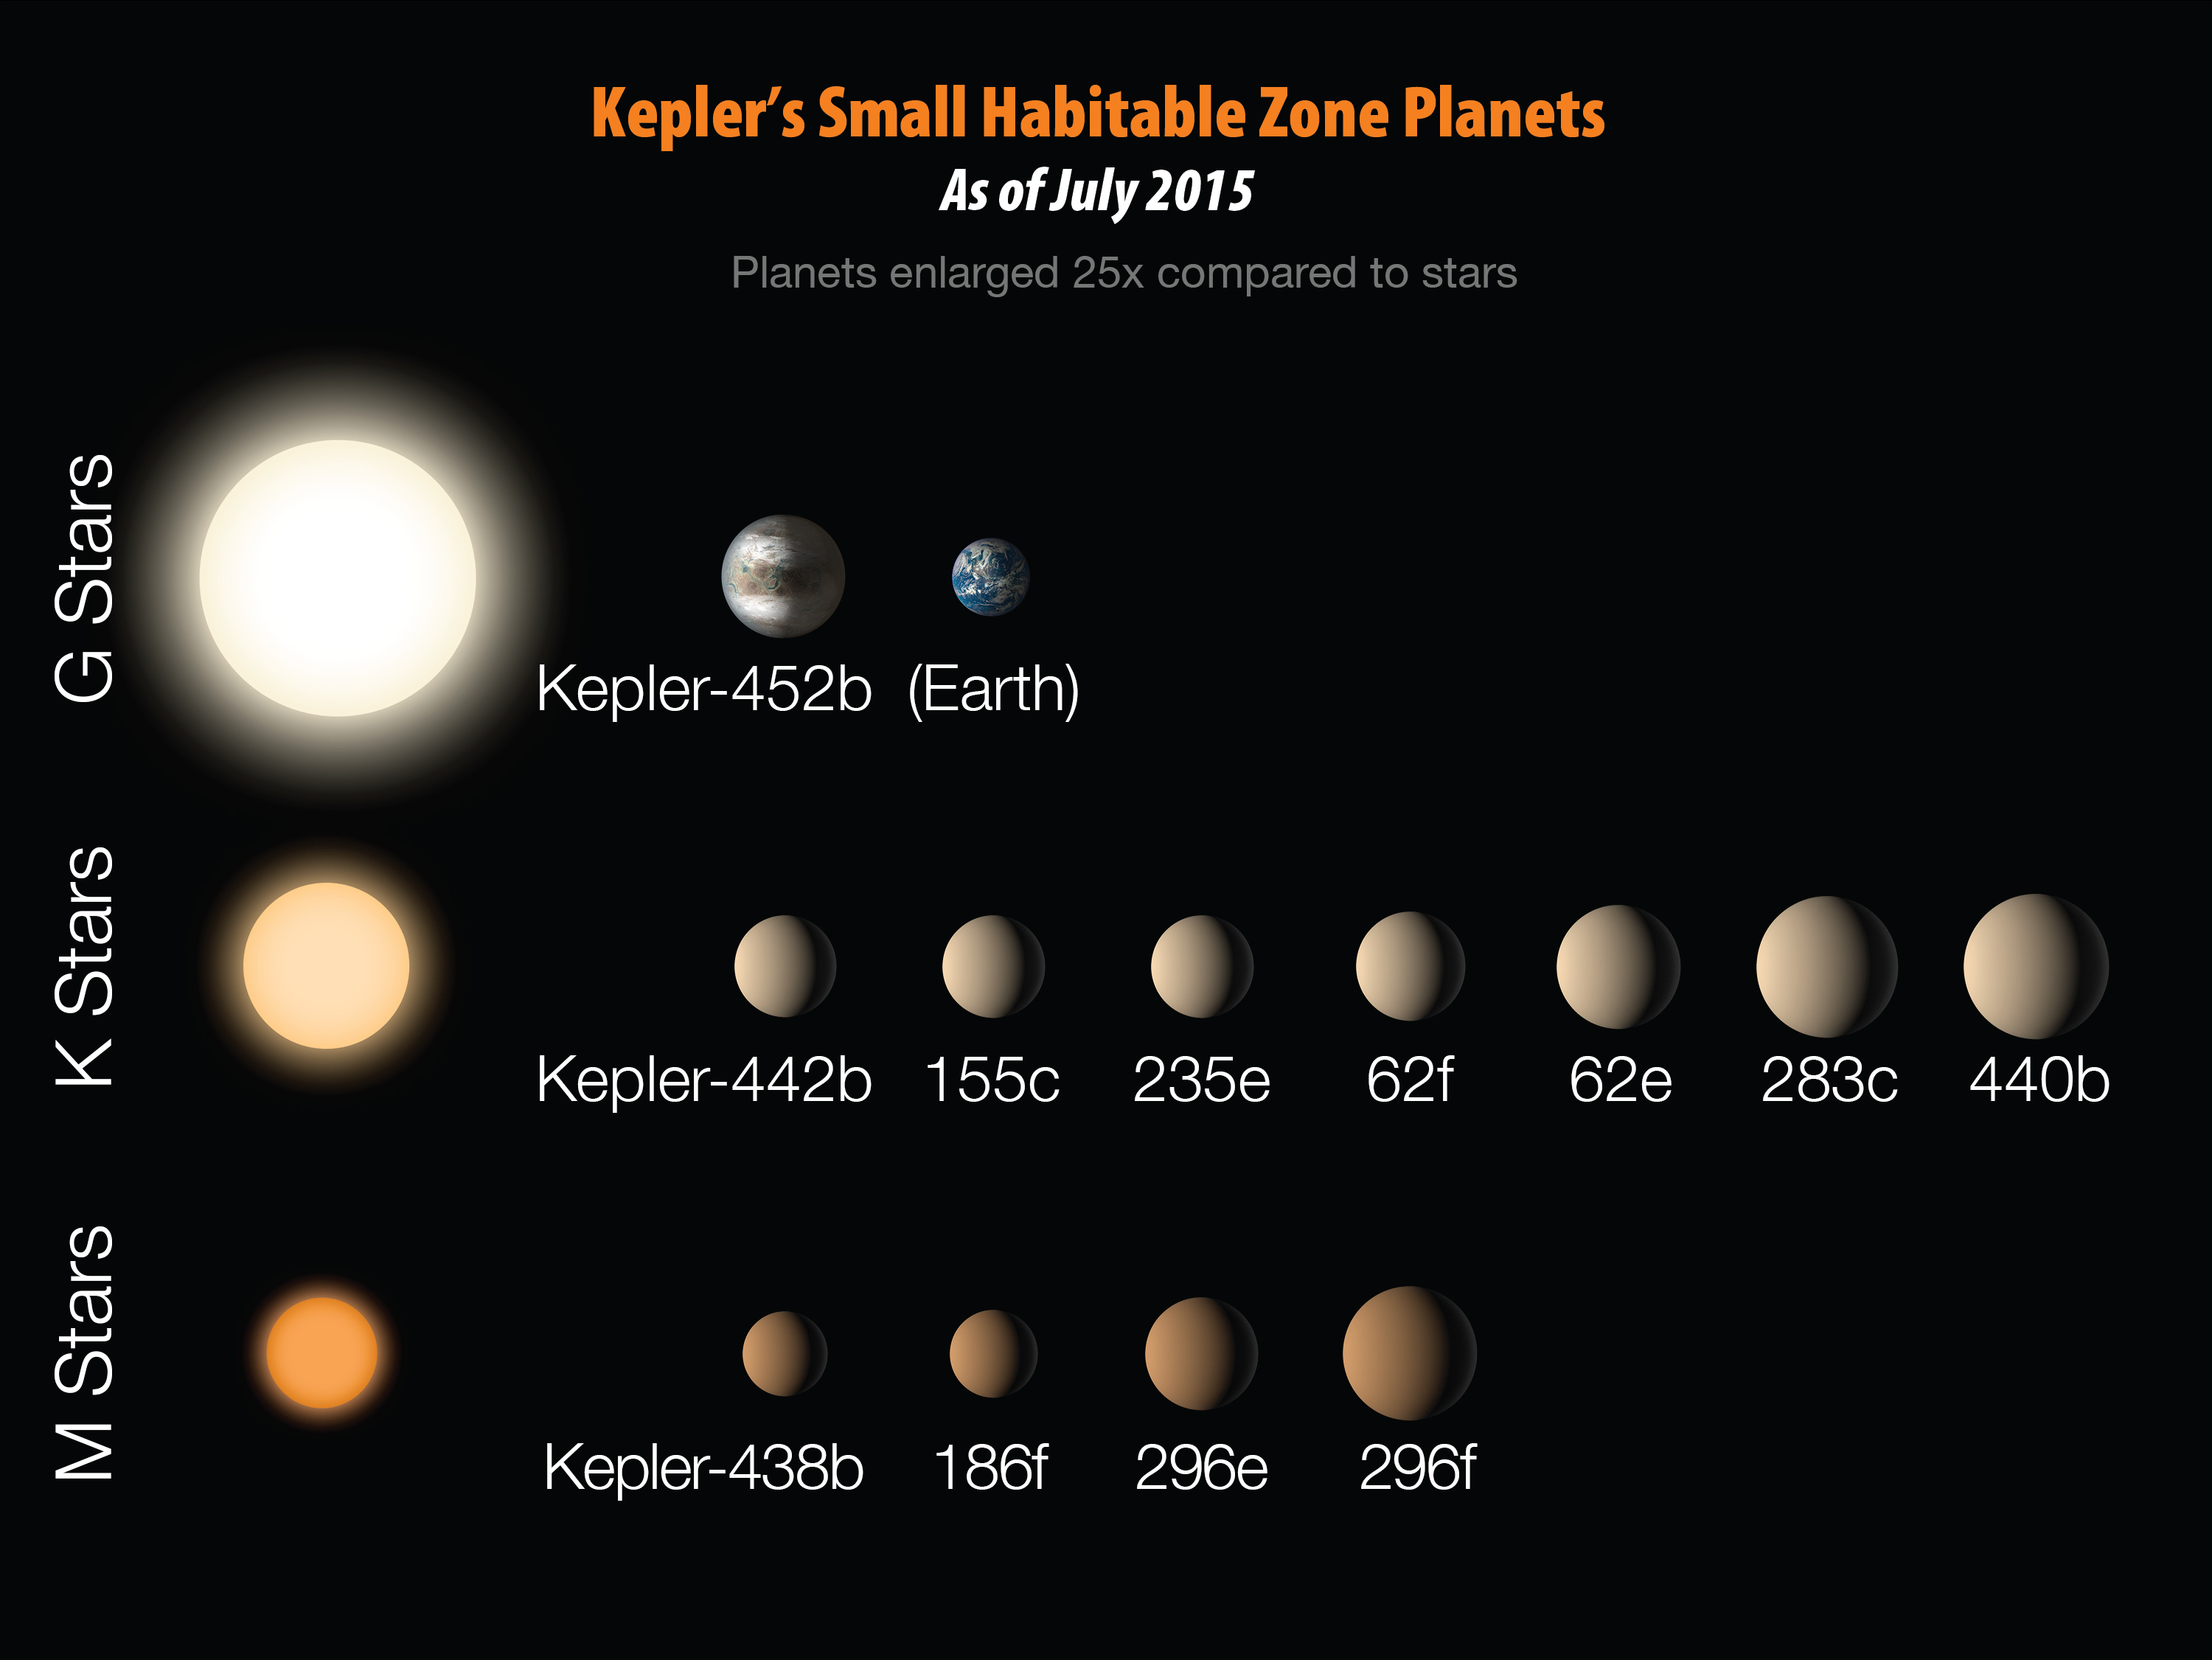 Graphic showing habitable zone planets